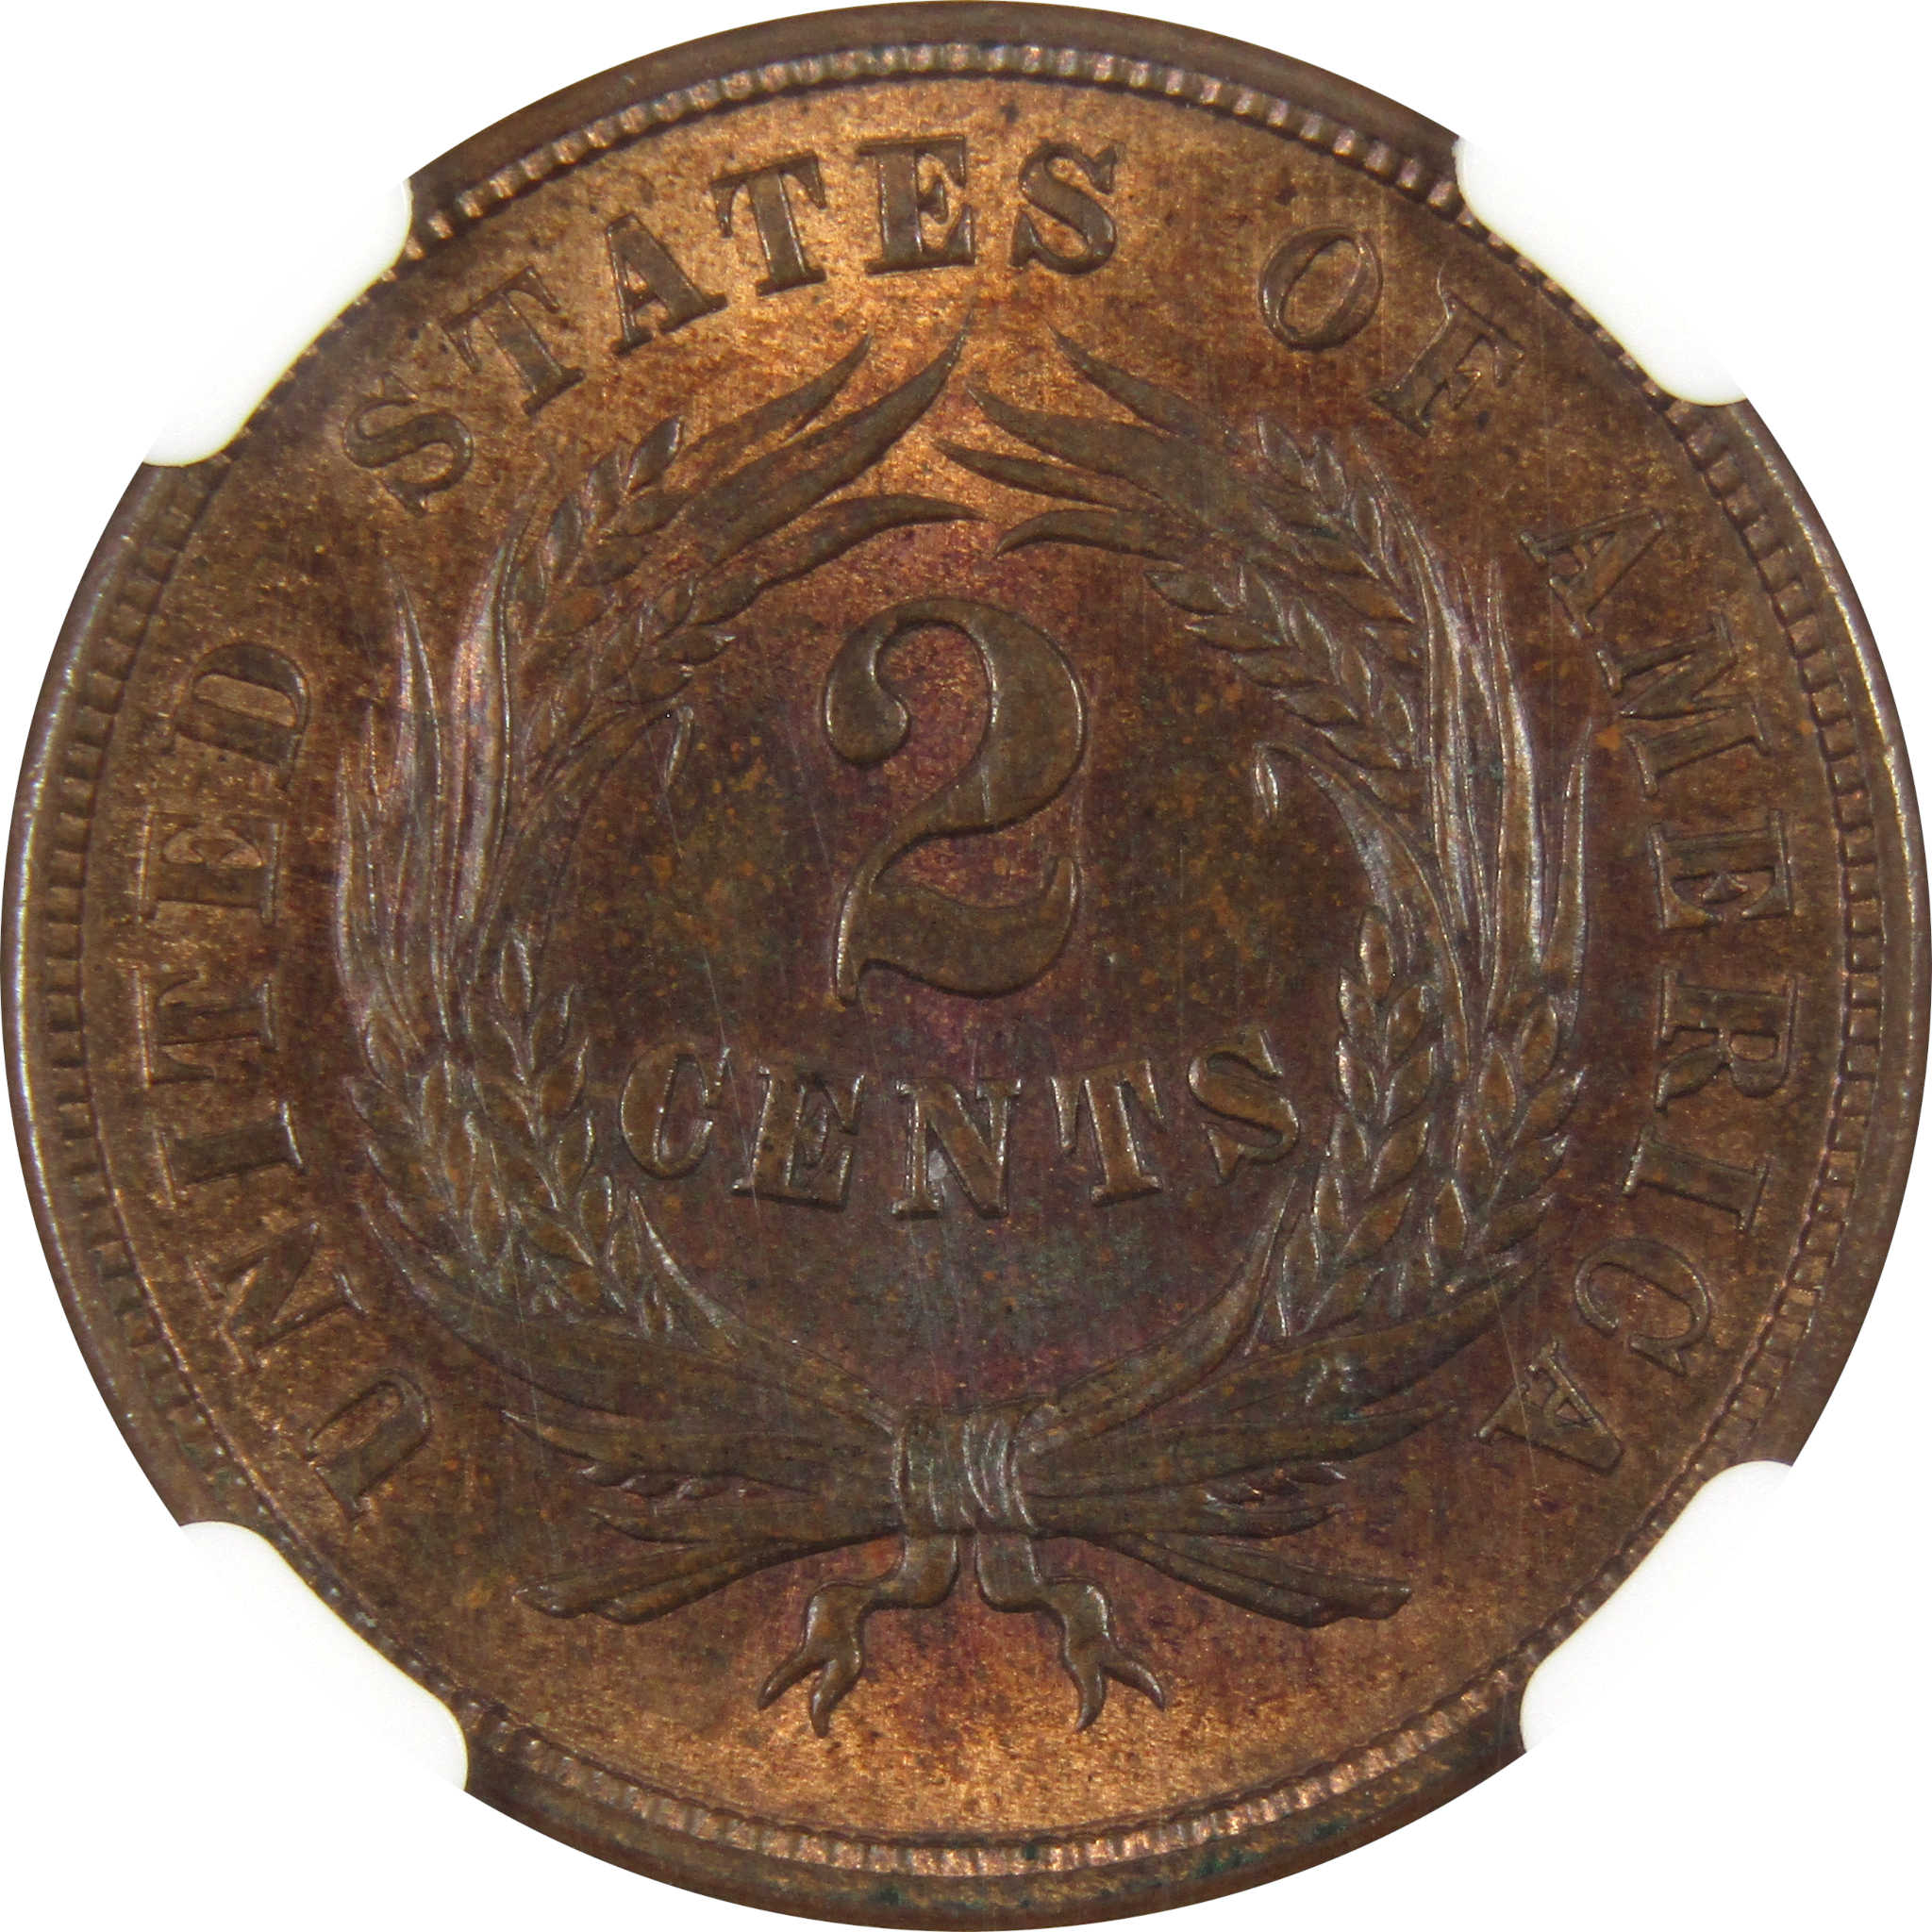 1865 Two Cent Piece MS 64 RB NGC 2c Uncirculated Coin SKU:I9198